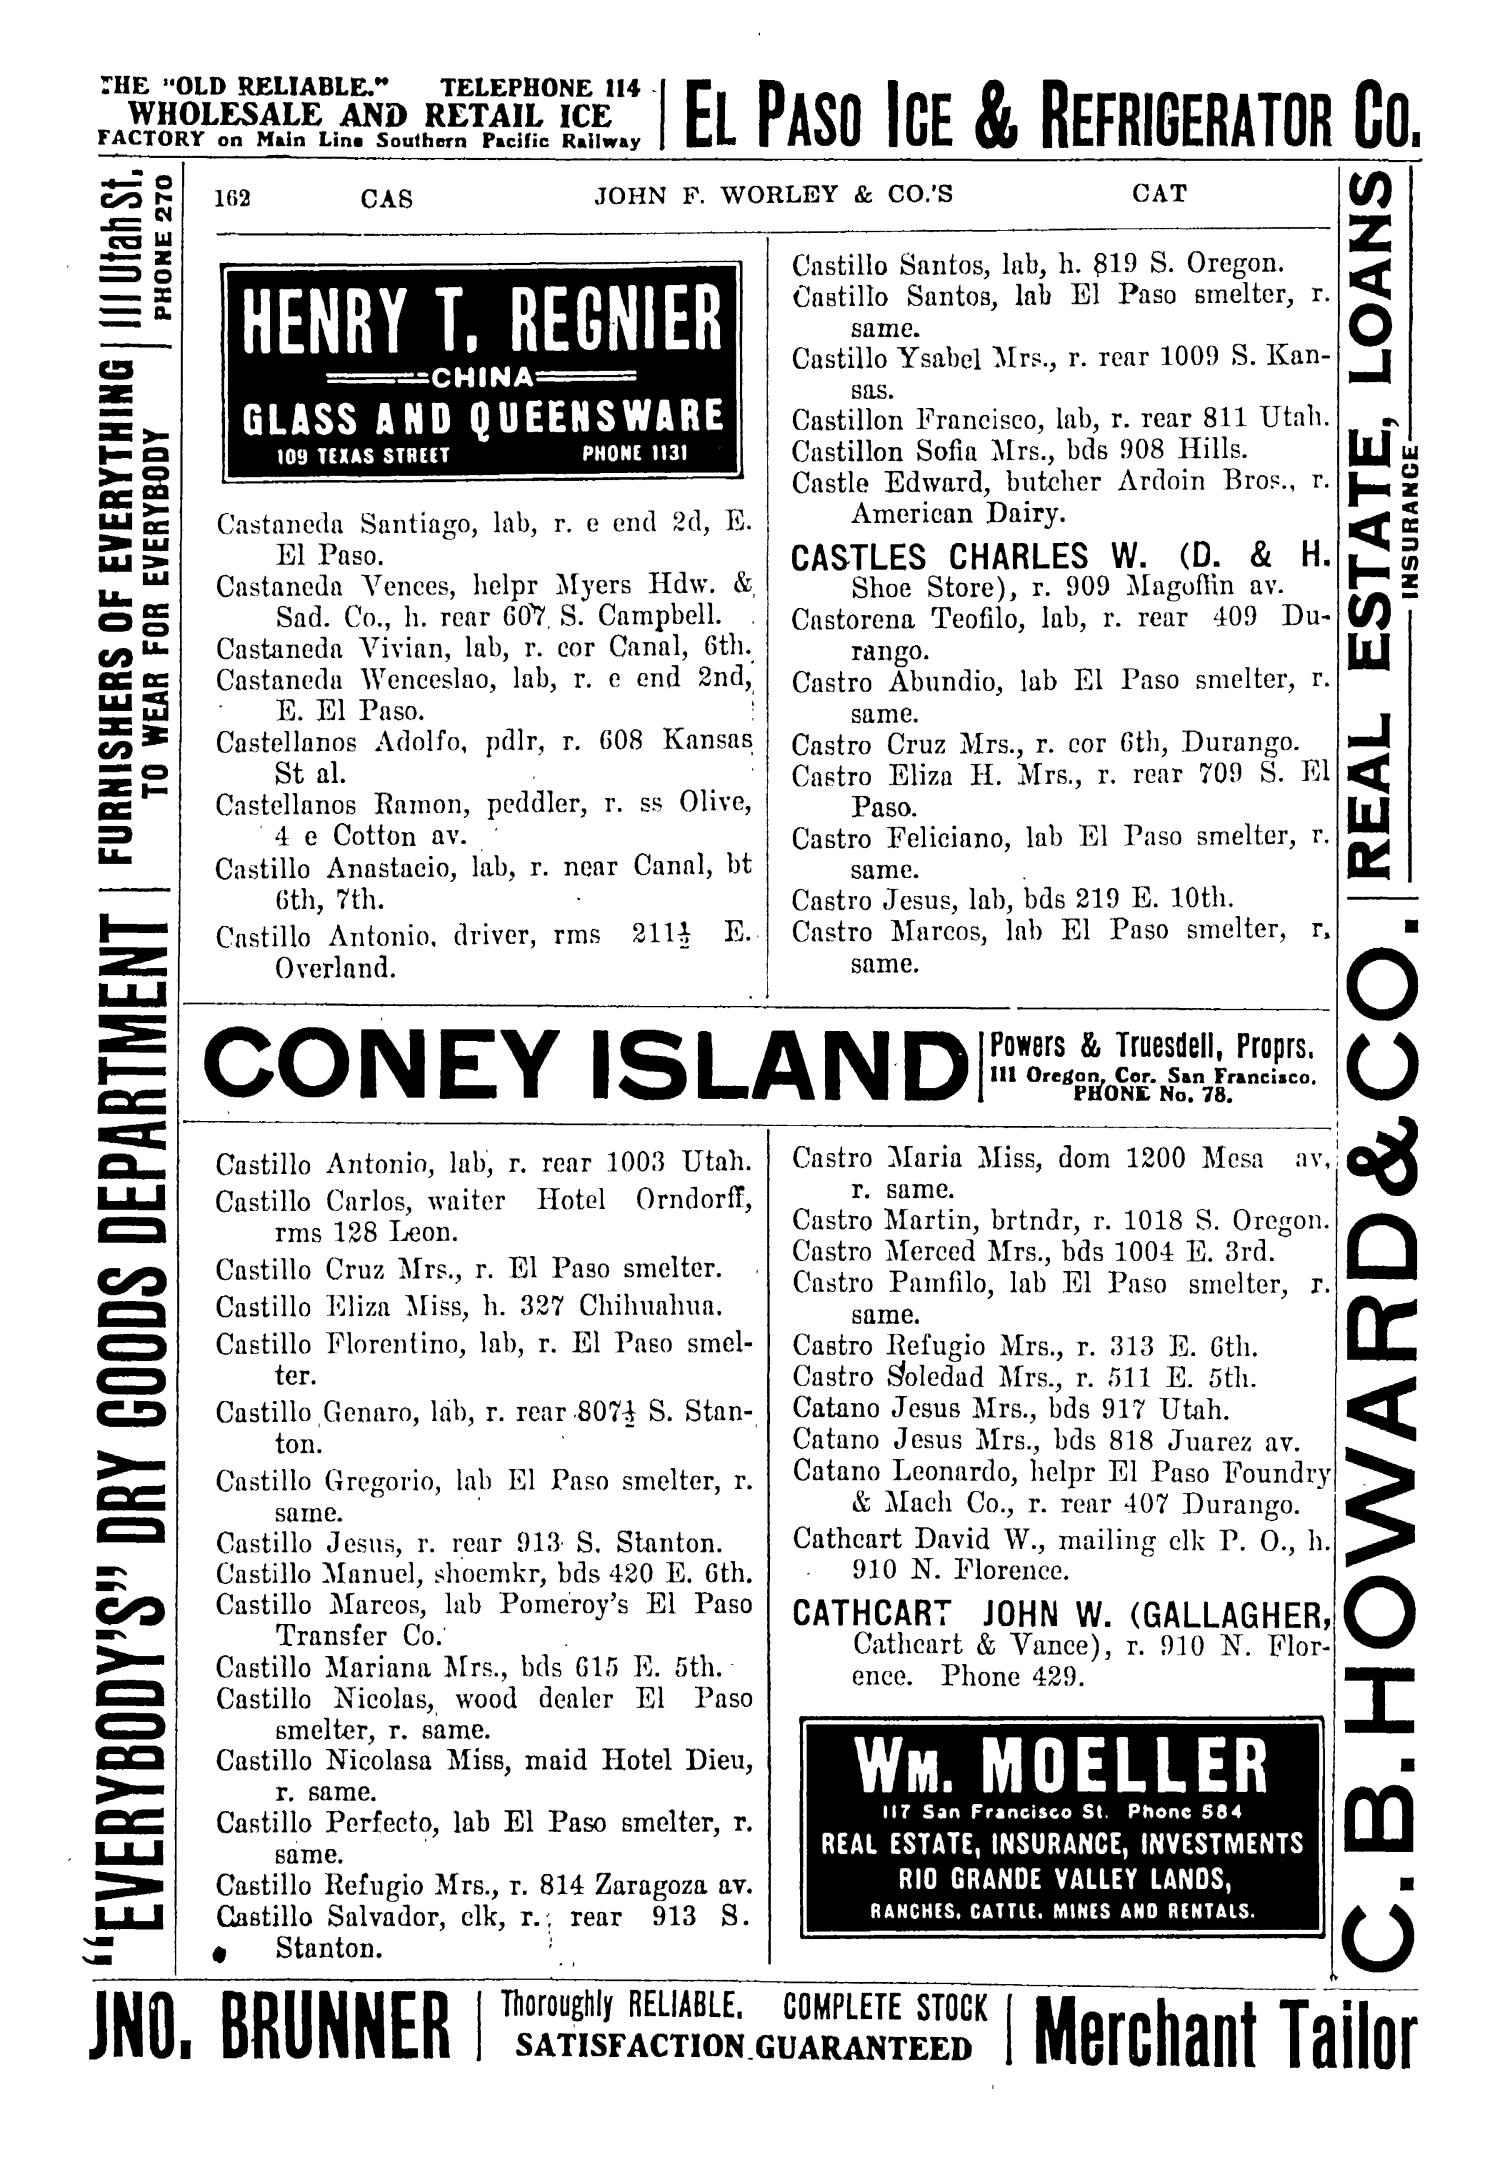 John F. Worley & Co.'s El Paso Directory for 1906
                                                
                                                    162
                                                